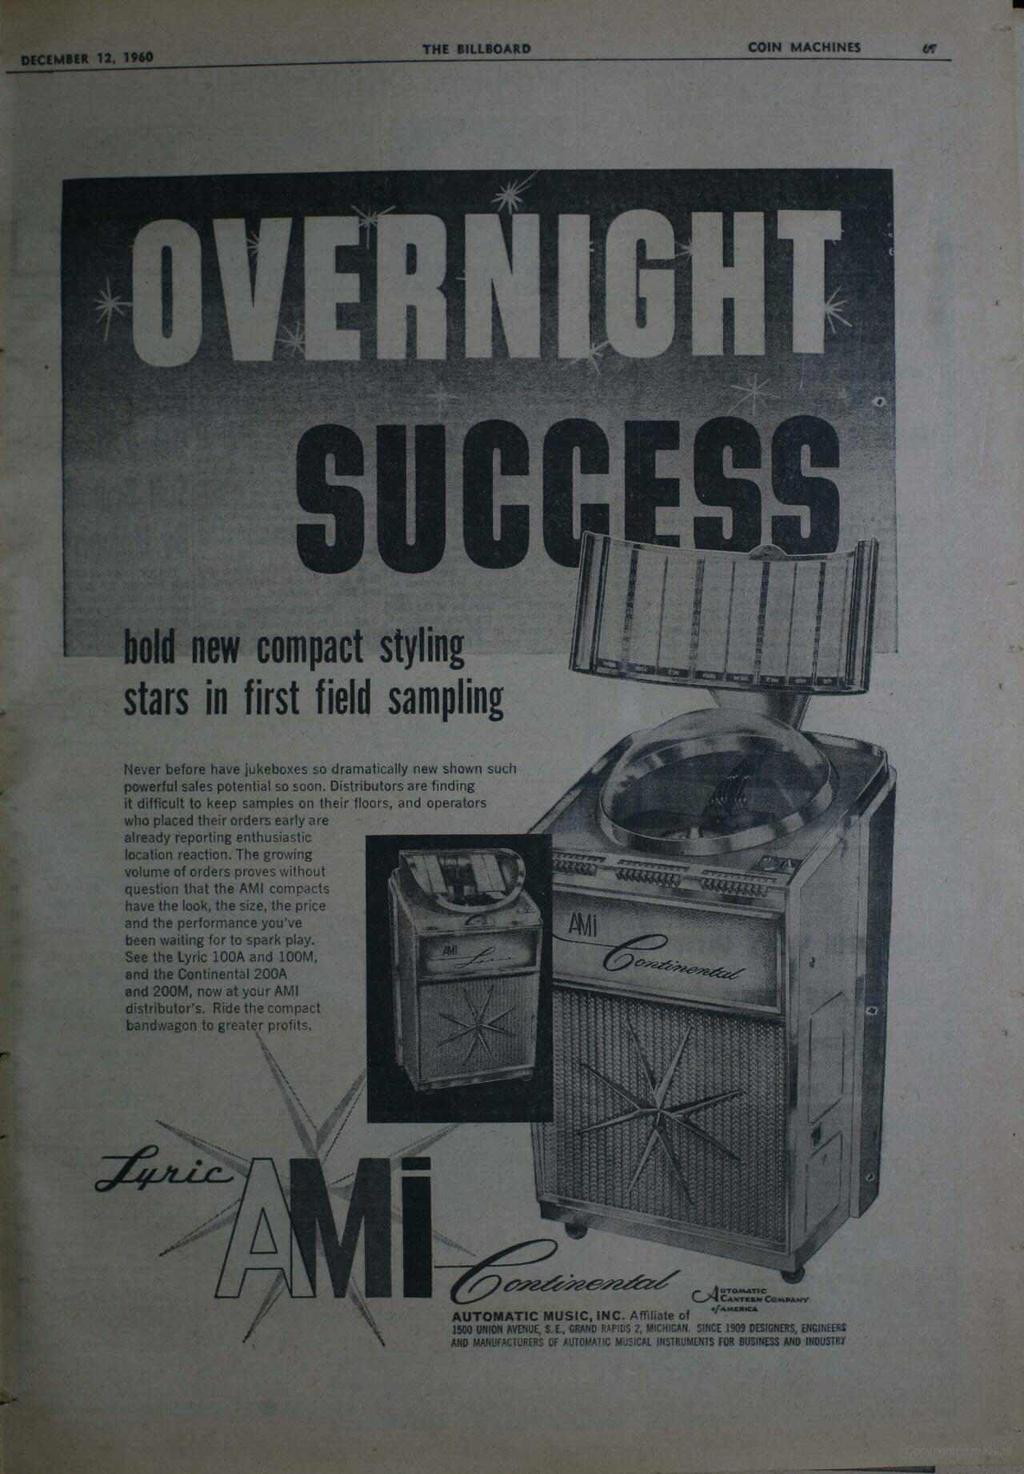 DECEMBER 12, 1960 THE BILLBOARD COIN MACHINES GT bold new compact styling stars in first field sampling Never before have jukeboxes so dramatically new shown such powerful sales potential so soon.